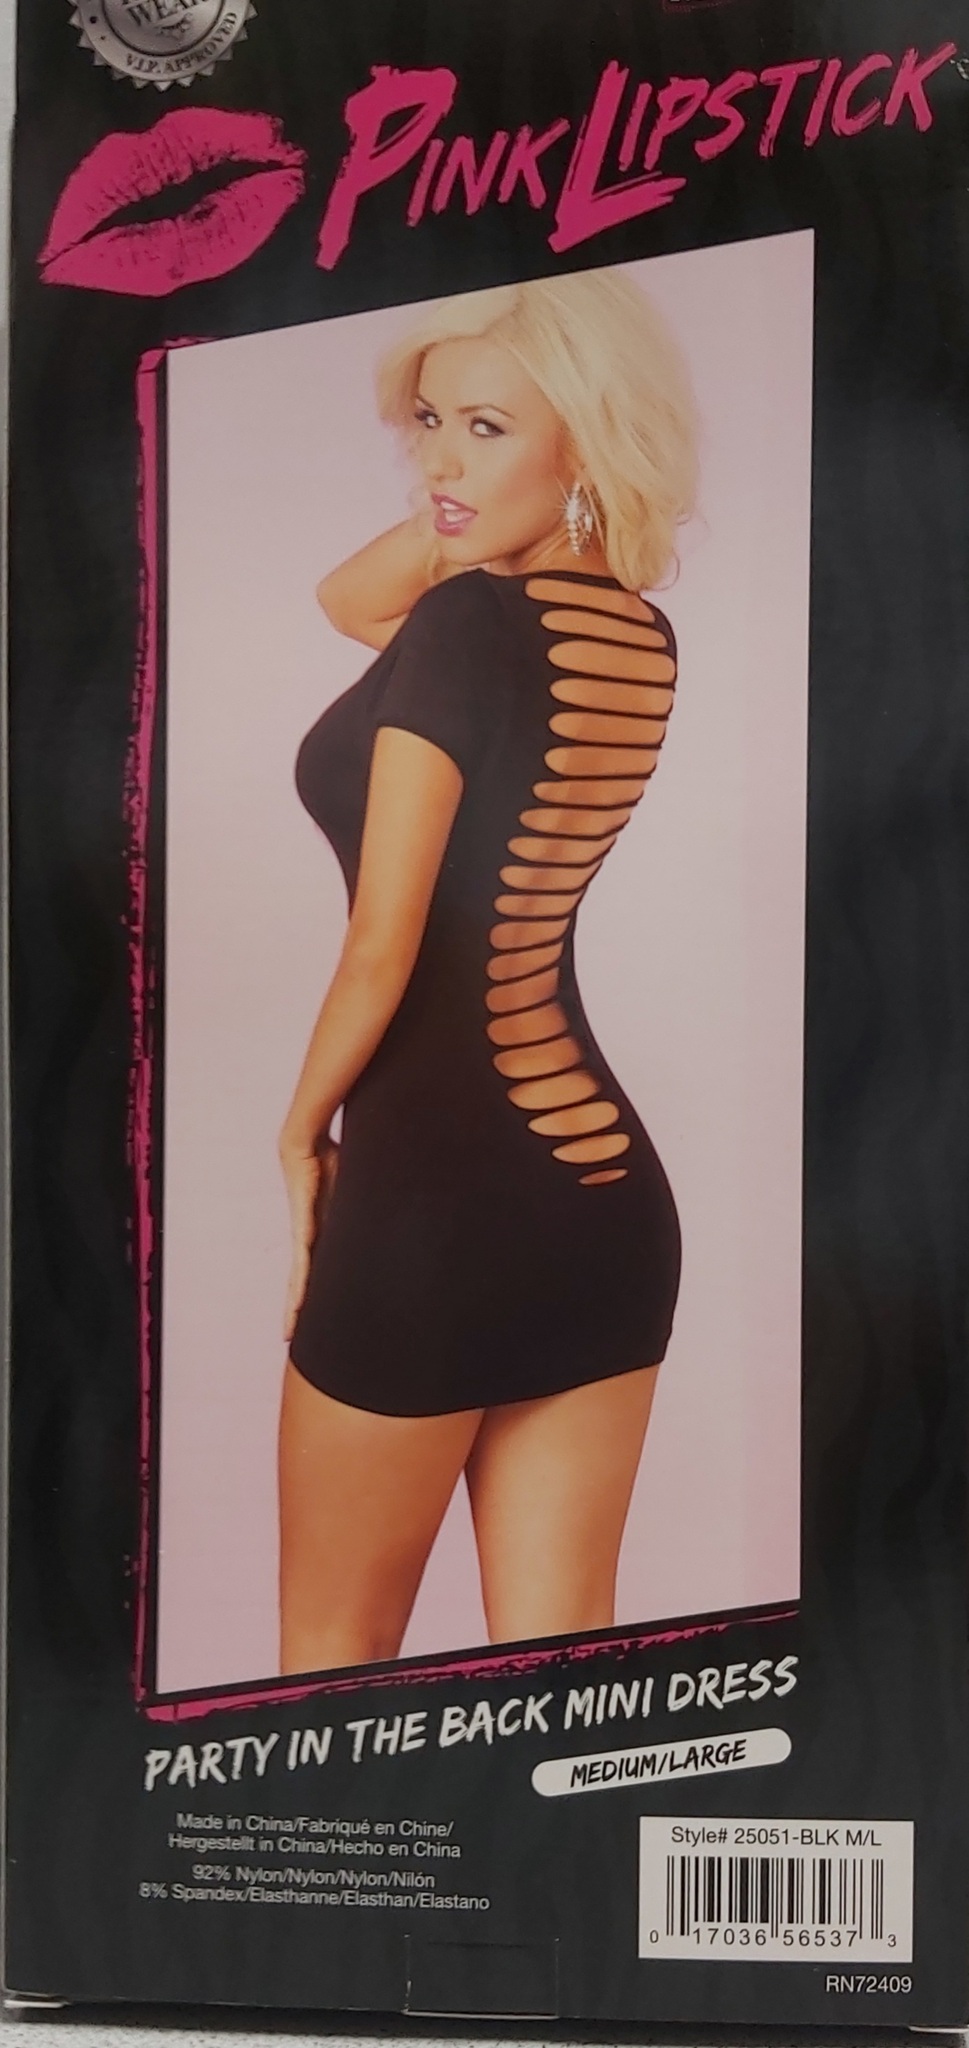 Party in the Back, Mini Dress M/L